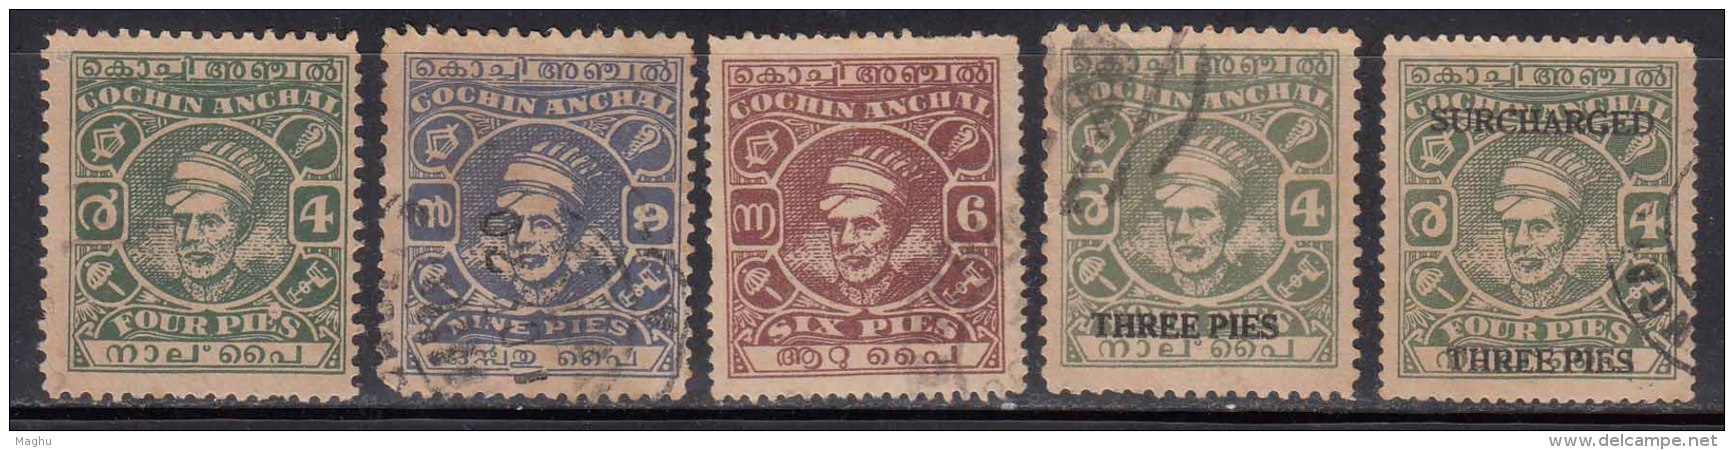 5 Diff., Cochin, Regular + Surcharged, 1943 Used, British India State - Cochin